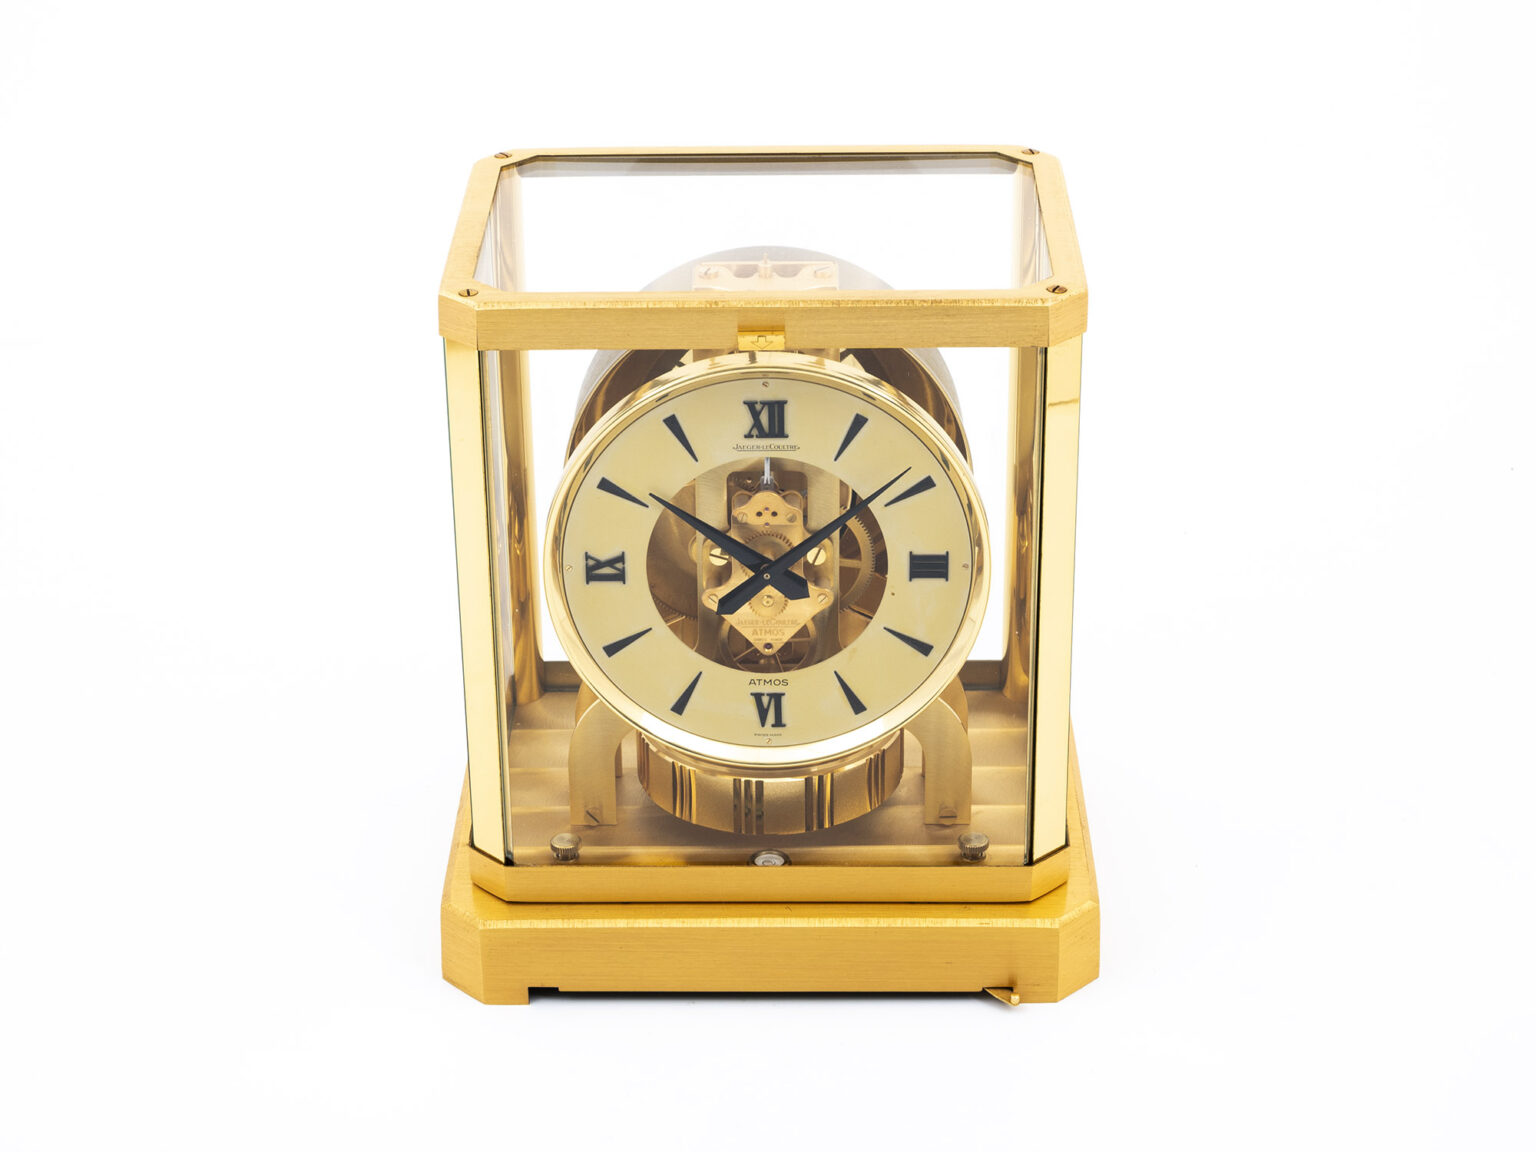 Home / Accessories / Mantiques / Atmos Clock by Jaeger-LeCoultre